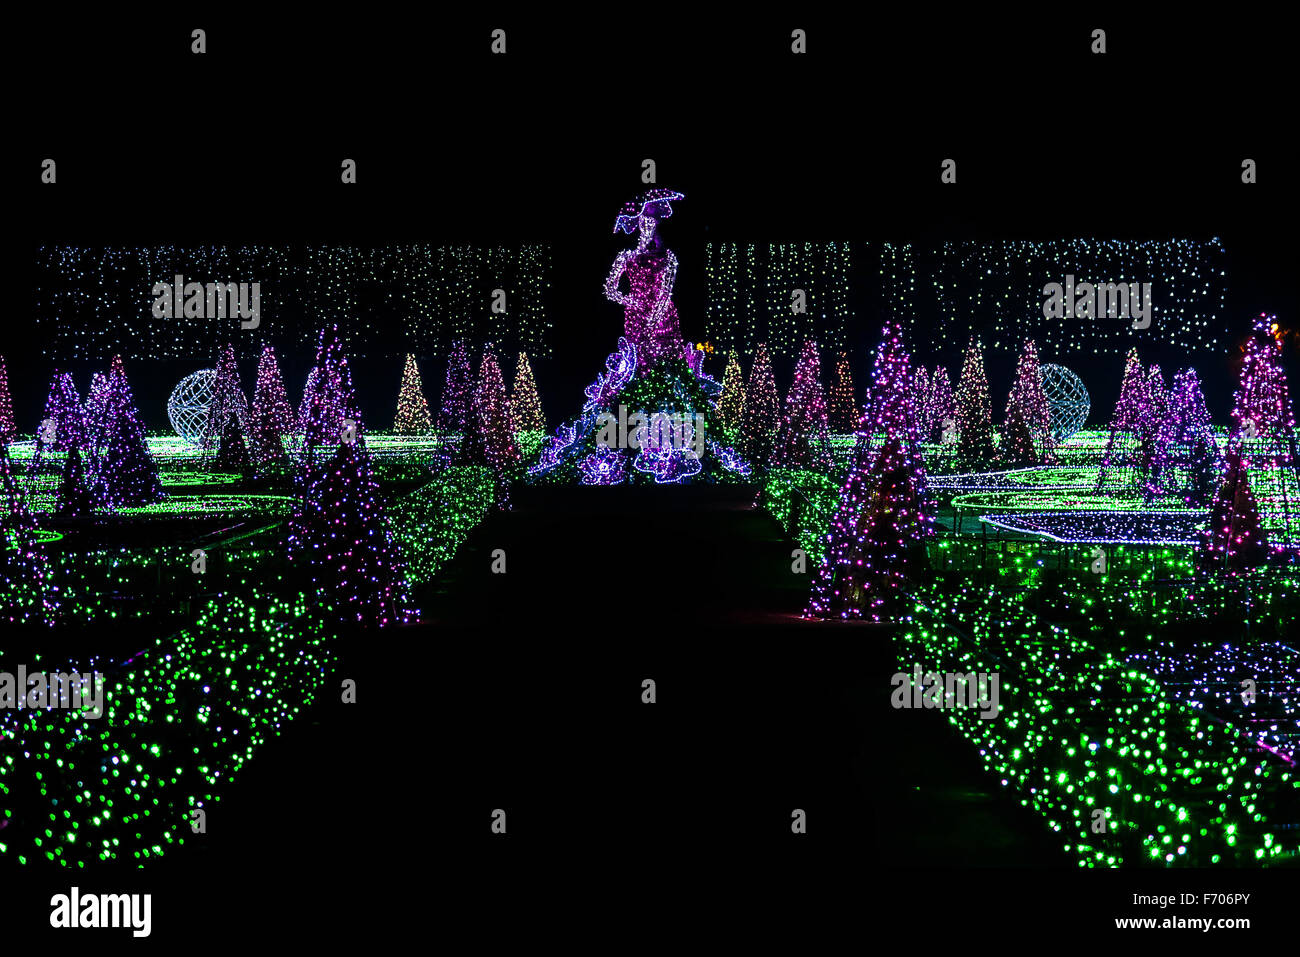 Light Show of Woman and Christmas Tree Sculptures in Royal Garden Stock Photo